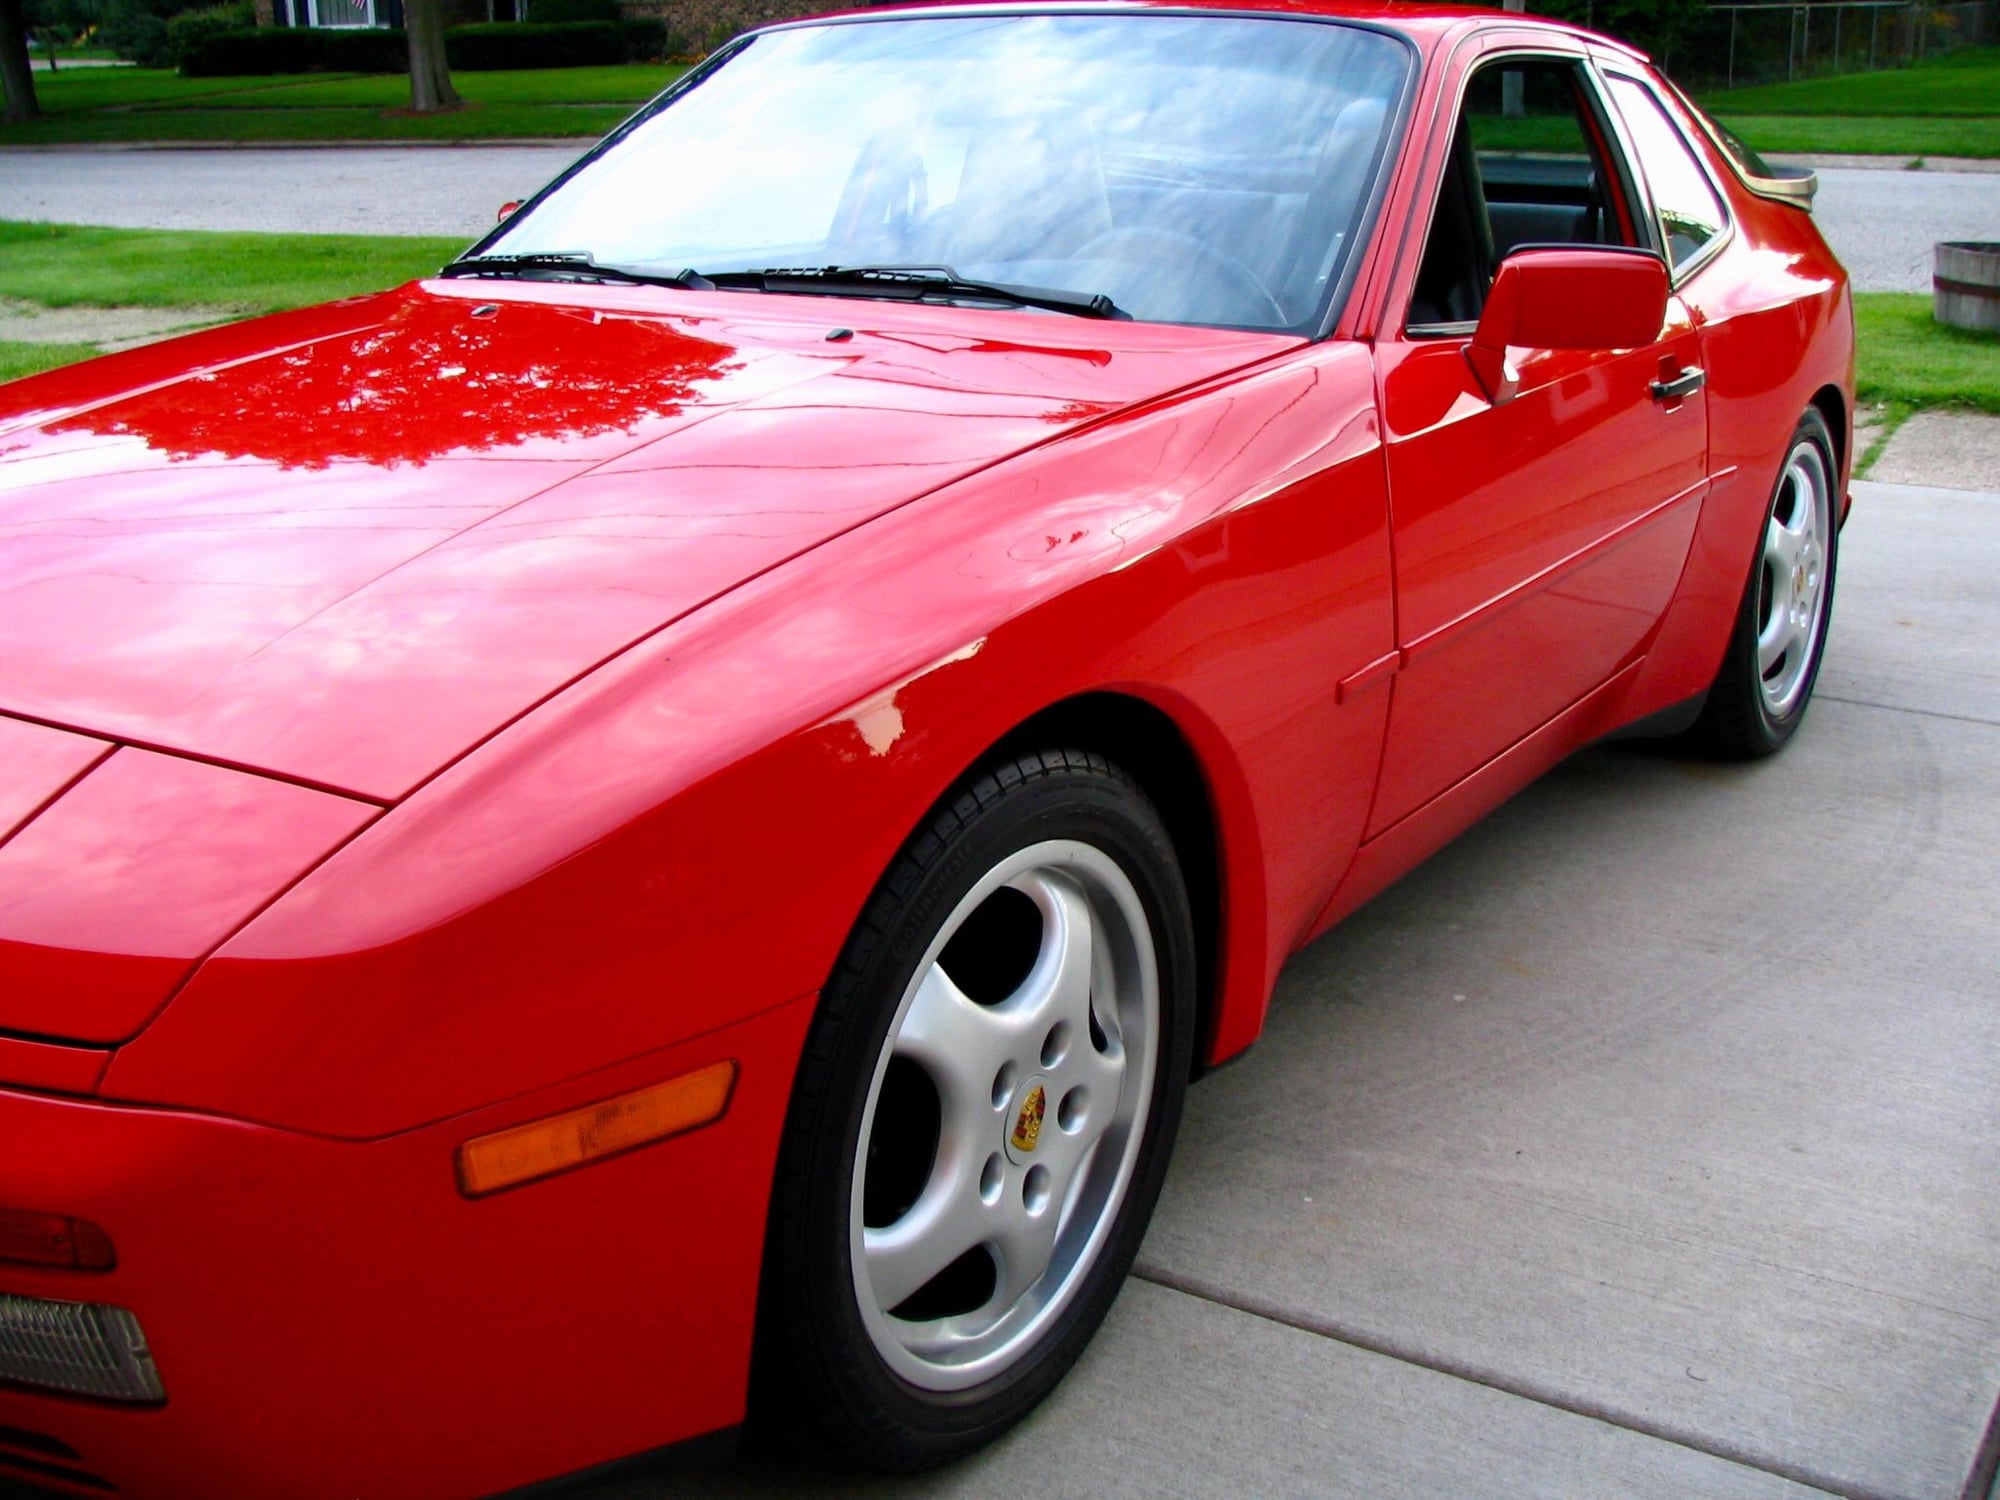 1989 Porsche 944 - 1989 944 TURBO, 77k MINT CONDITION: Stock, Never Raced, Garage Queen, Owned Since '02 - Used - VIN Guards Red/Black - 4 cyl - Manual - Coupe - Red - Eau Claire, MI 49111, United States